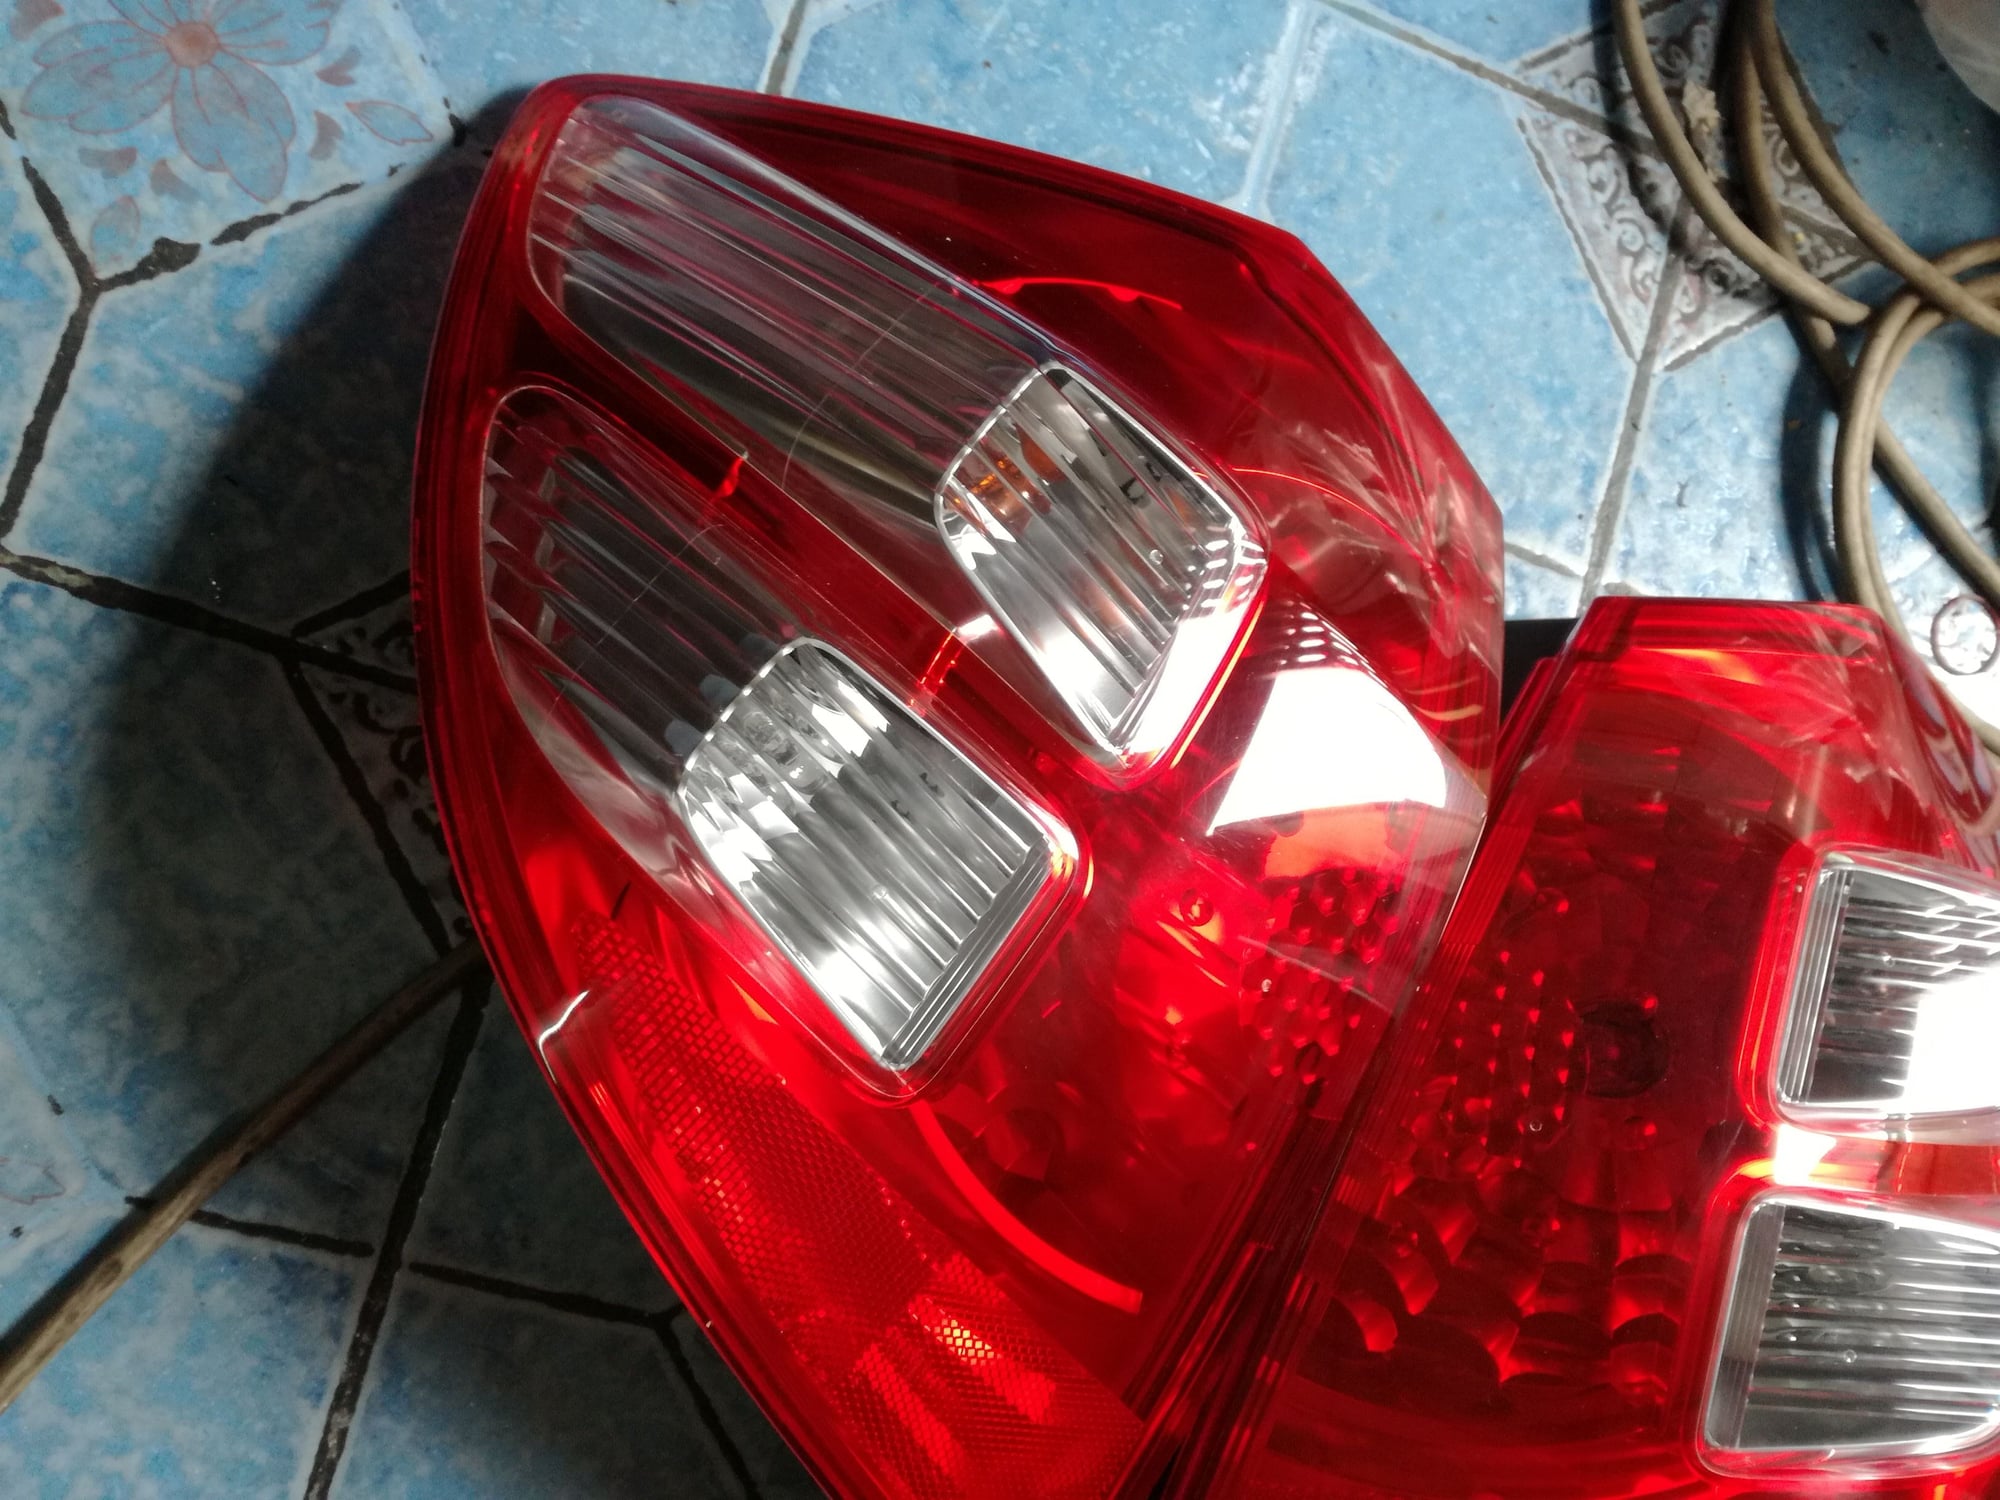 FS For Sale JDM taillights fit GE8 Unofficial Honda 